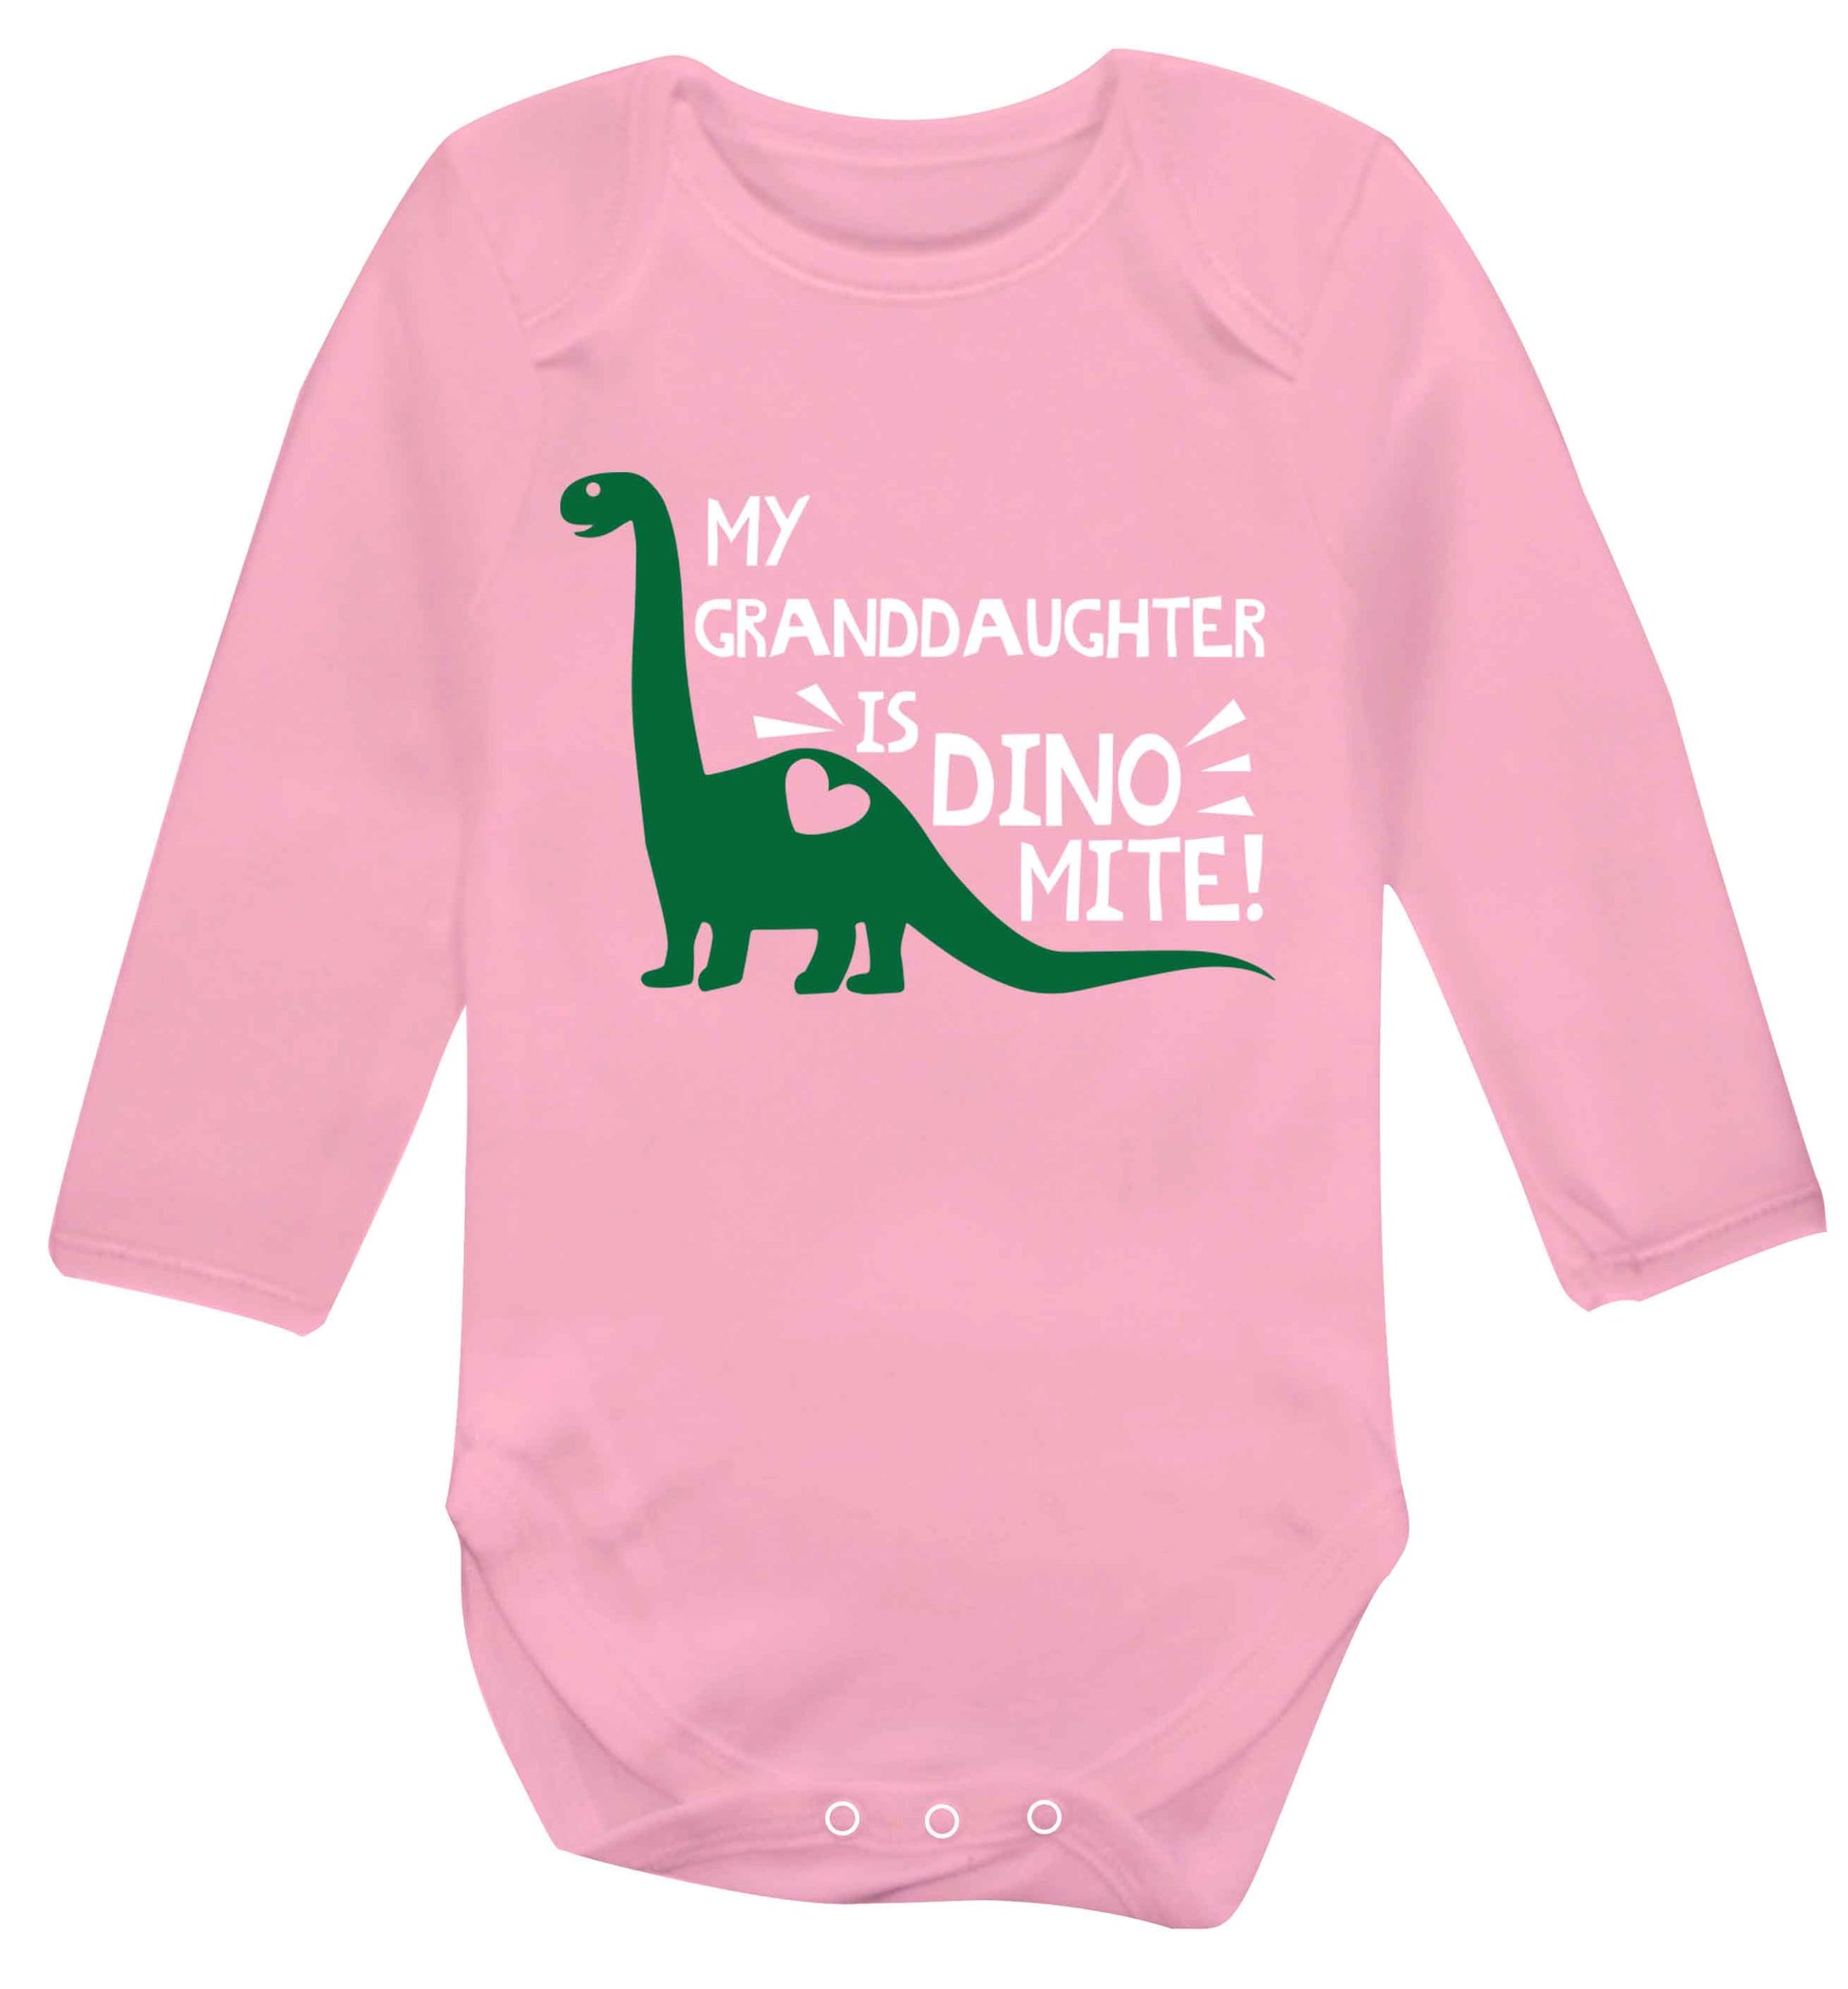 My granddaughter is dinomite! Baby Vest long sleeved pale pink 6-12 months